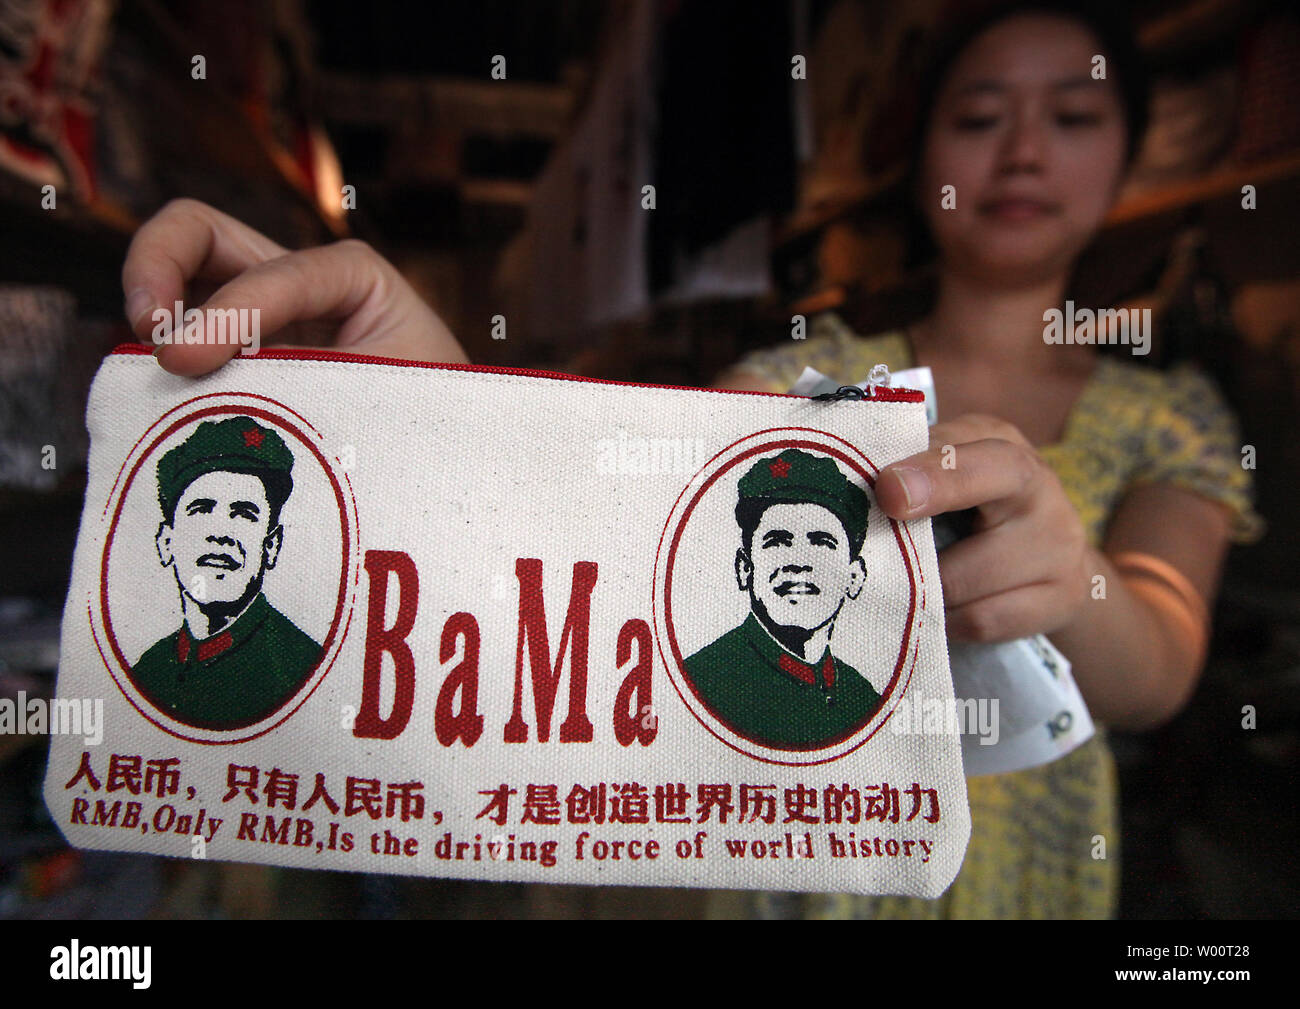 Money wallets and bags featuring U.S. President Barack Obama dressed in the Red Army communist fatigues of China's former helmsman Chairman Mao Zedong are being sold in shops in Beijing, September 14, 2010.  'Oba-Mao' t-shirts and accessories are big sellers in Beijing due to Obama's unflagging popularity among many Chinese.    UPI/Stephen Shaver Stock Photo